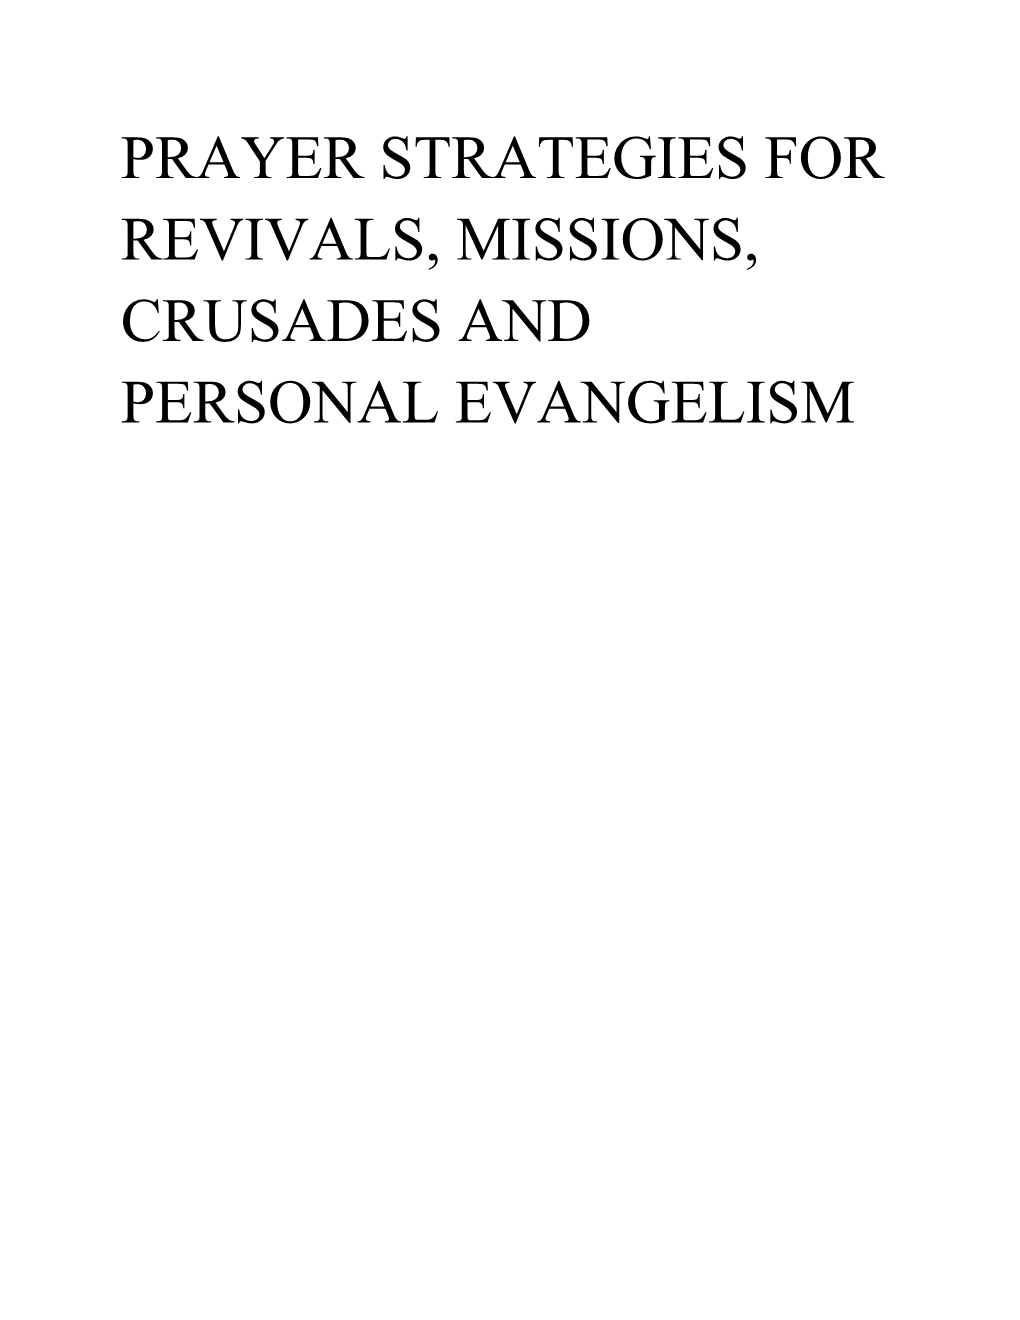 Prayer Strategies for Revivals, Missions, Crusades and Personal Evangelism